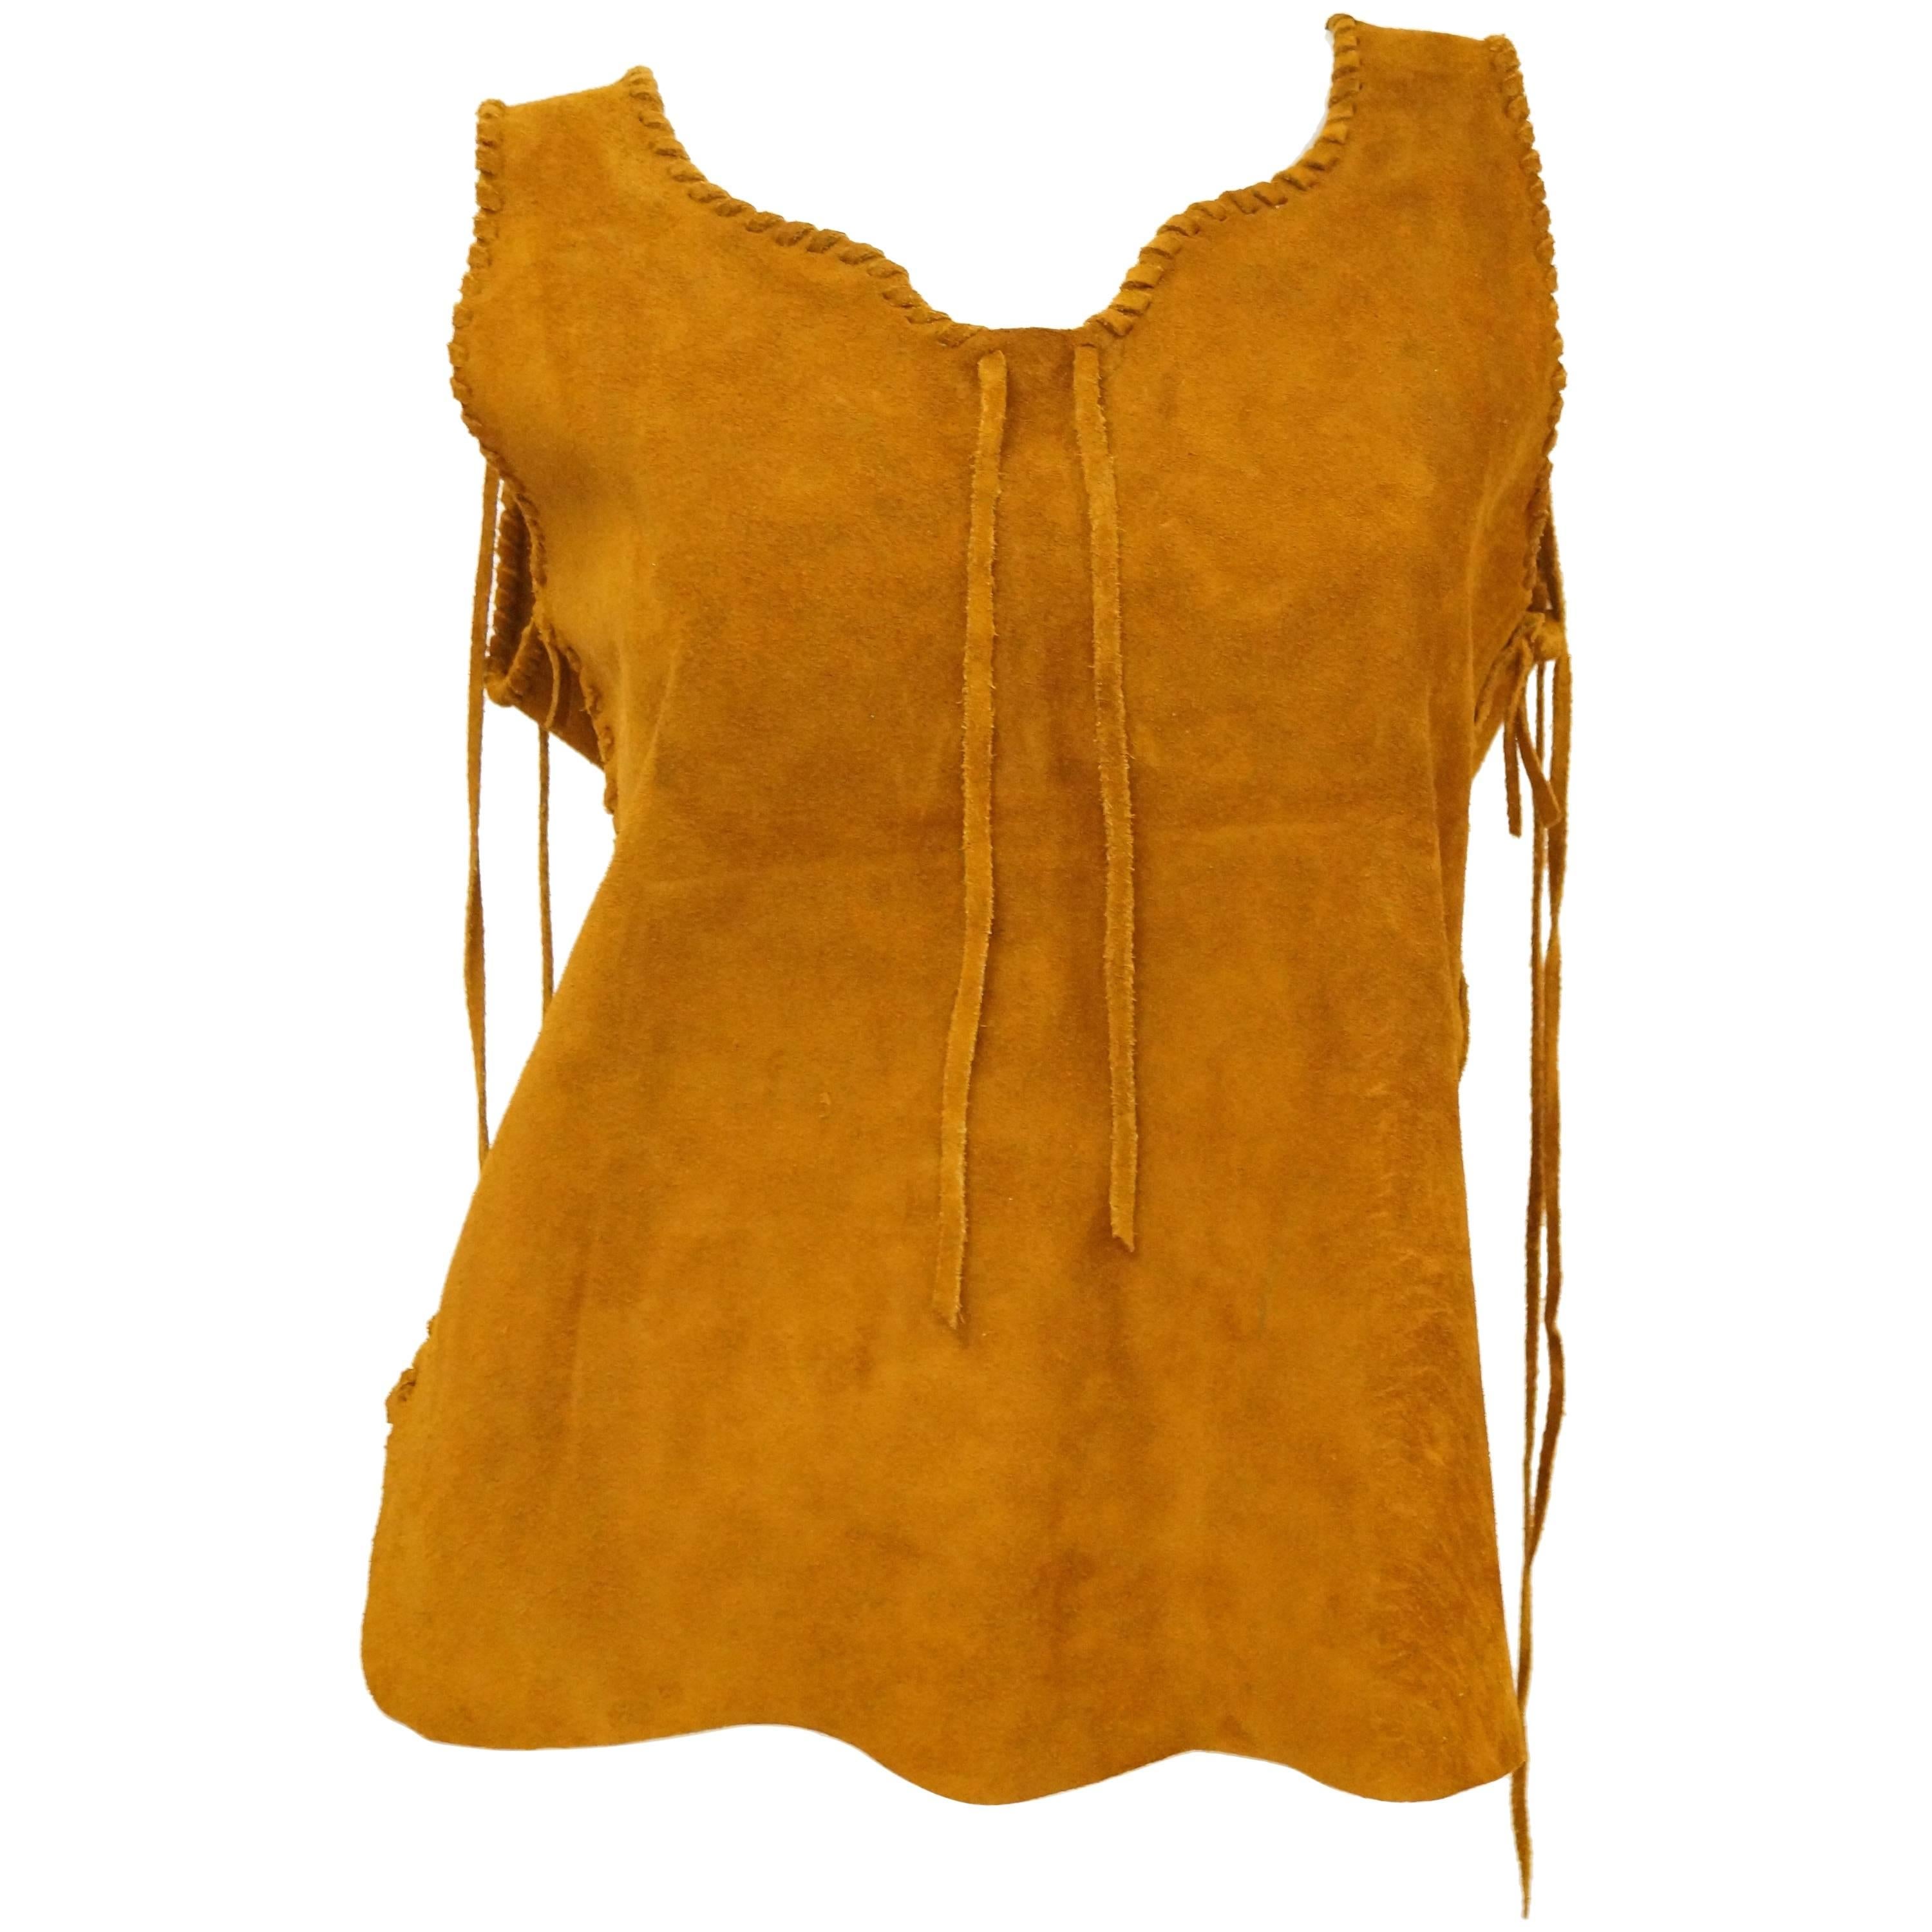  1970s Suede Vest With Braided Fringe